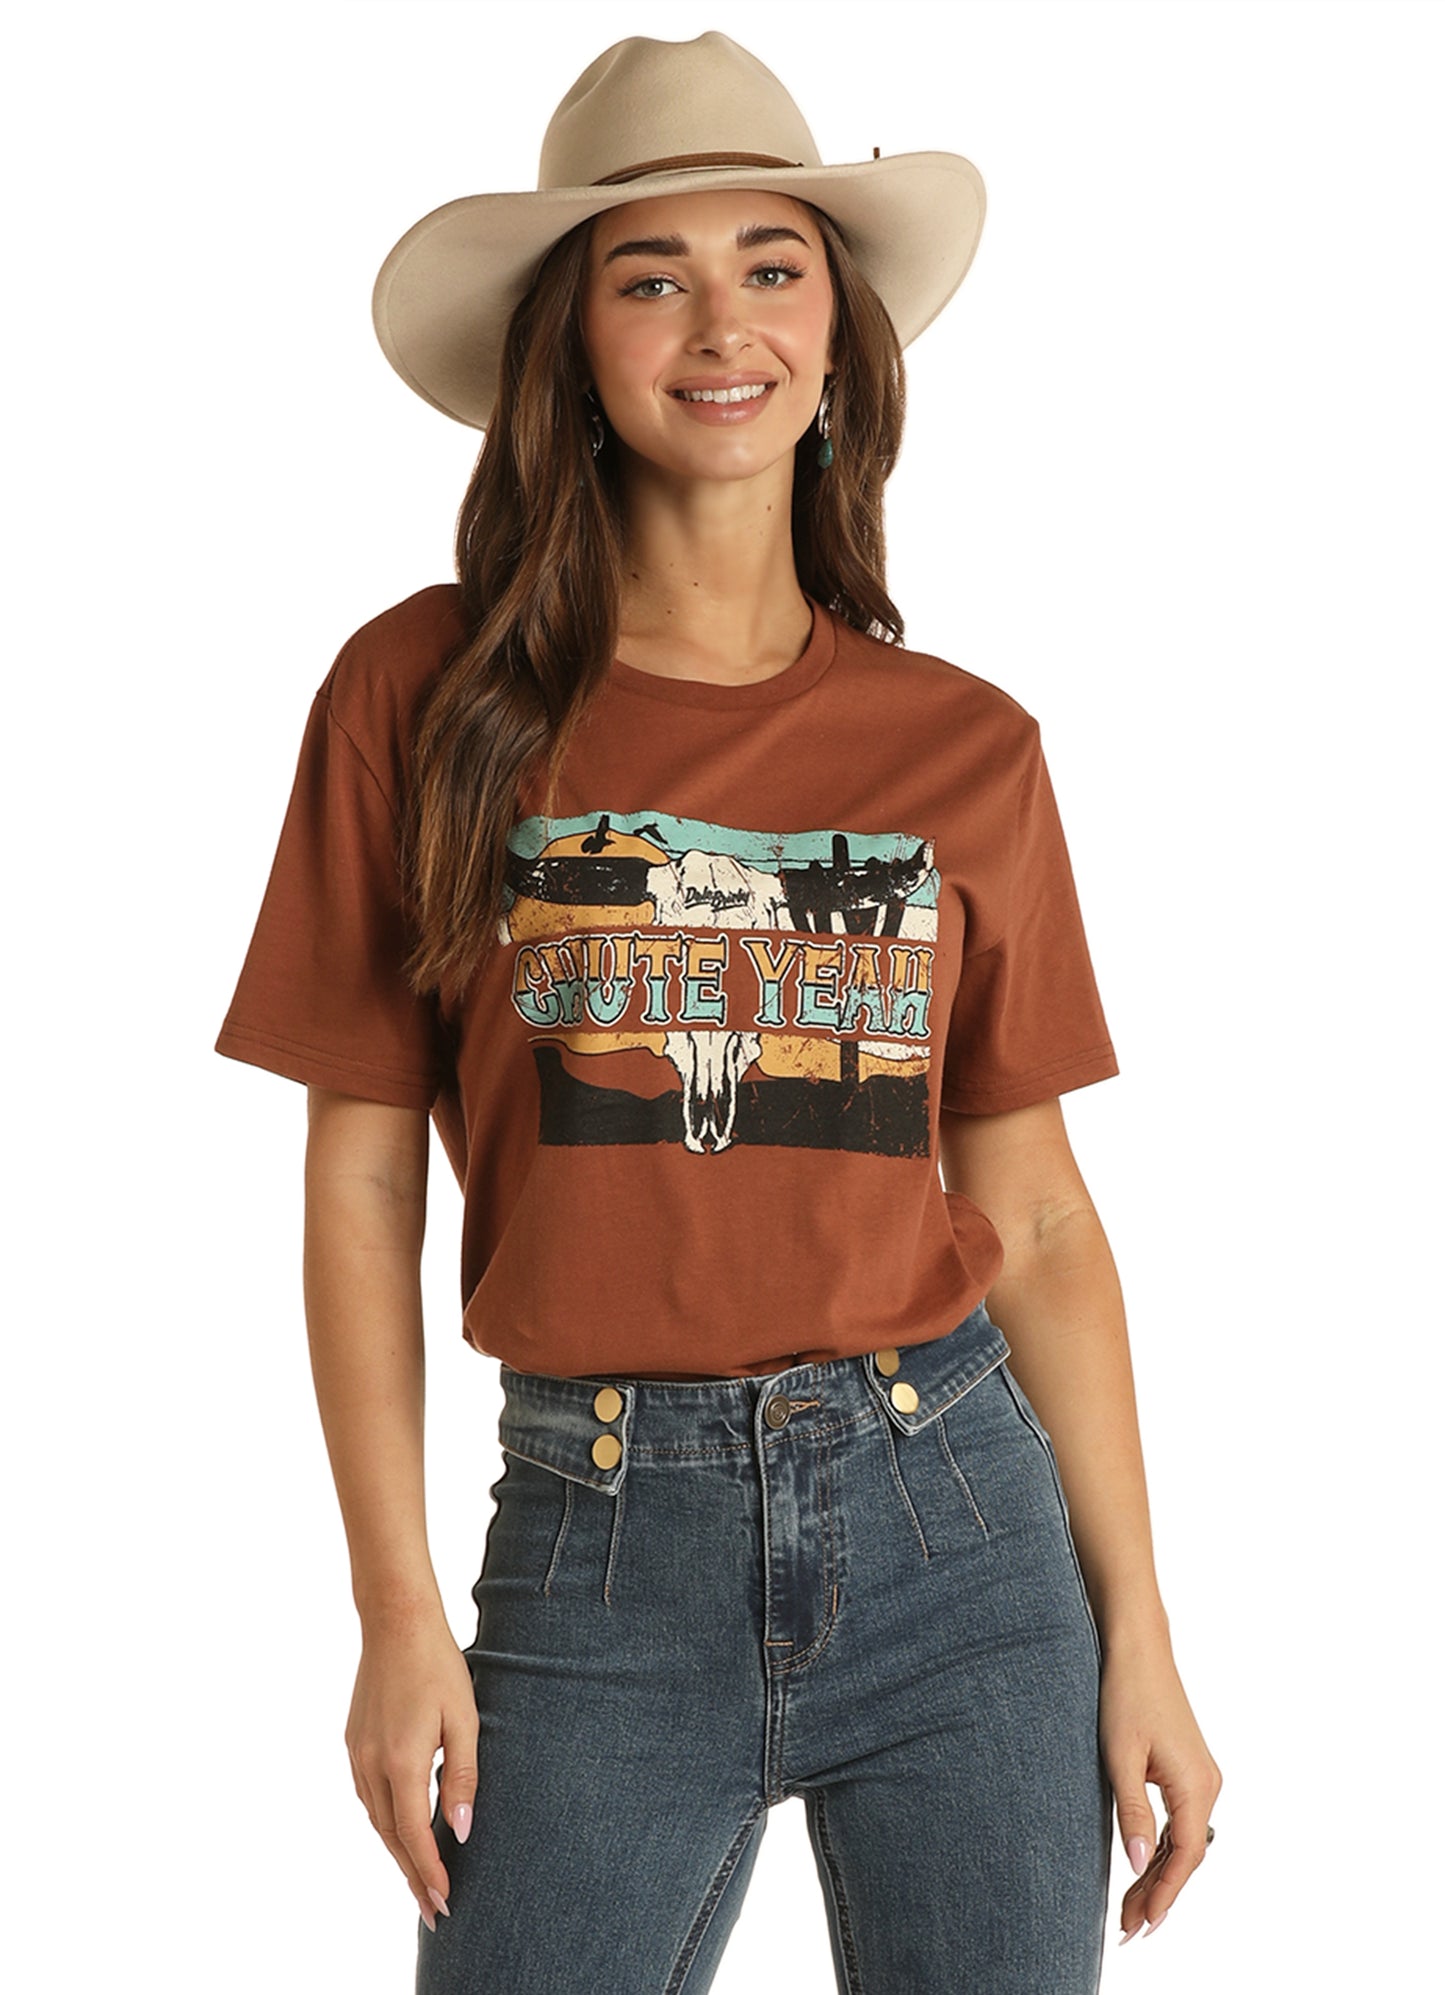 Adult Dale Brisby Chute Yeah Tee